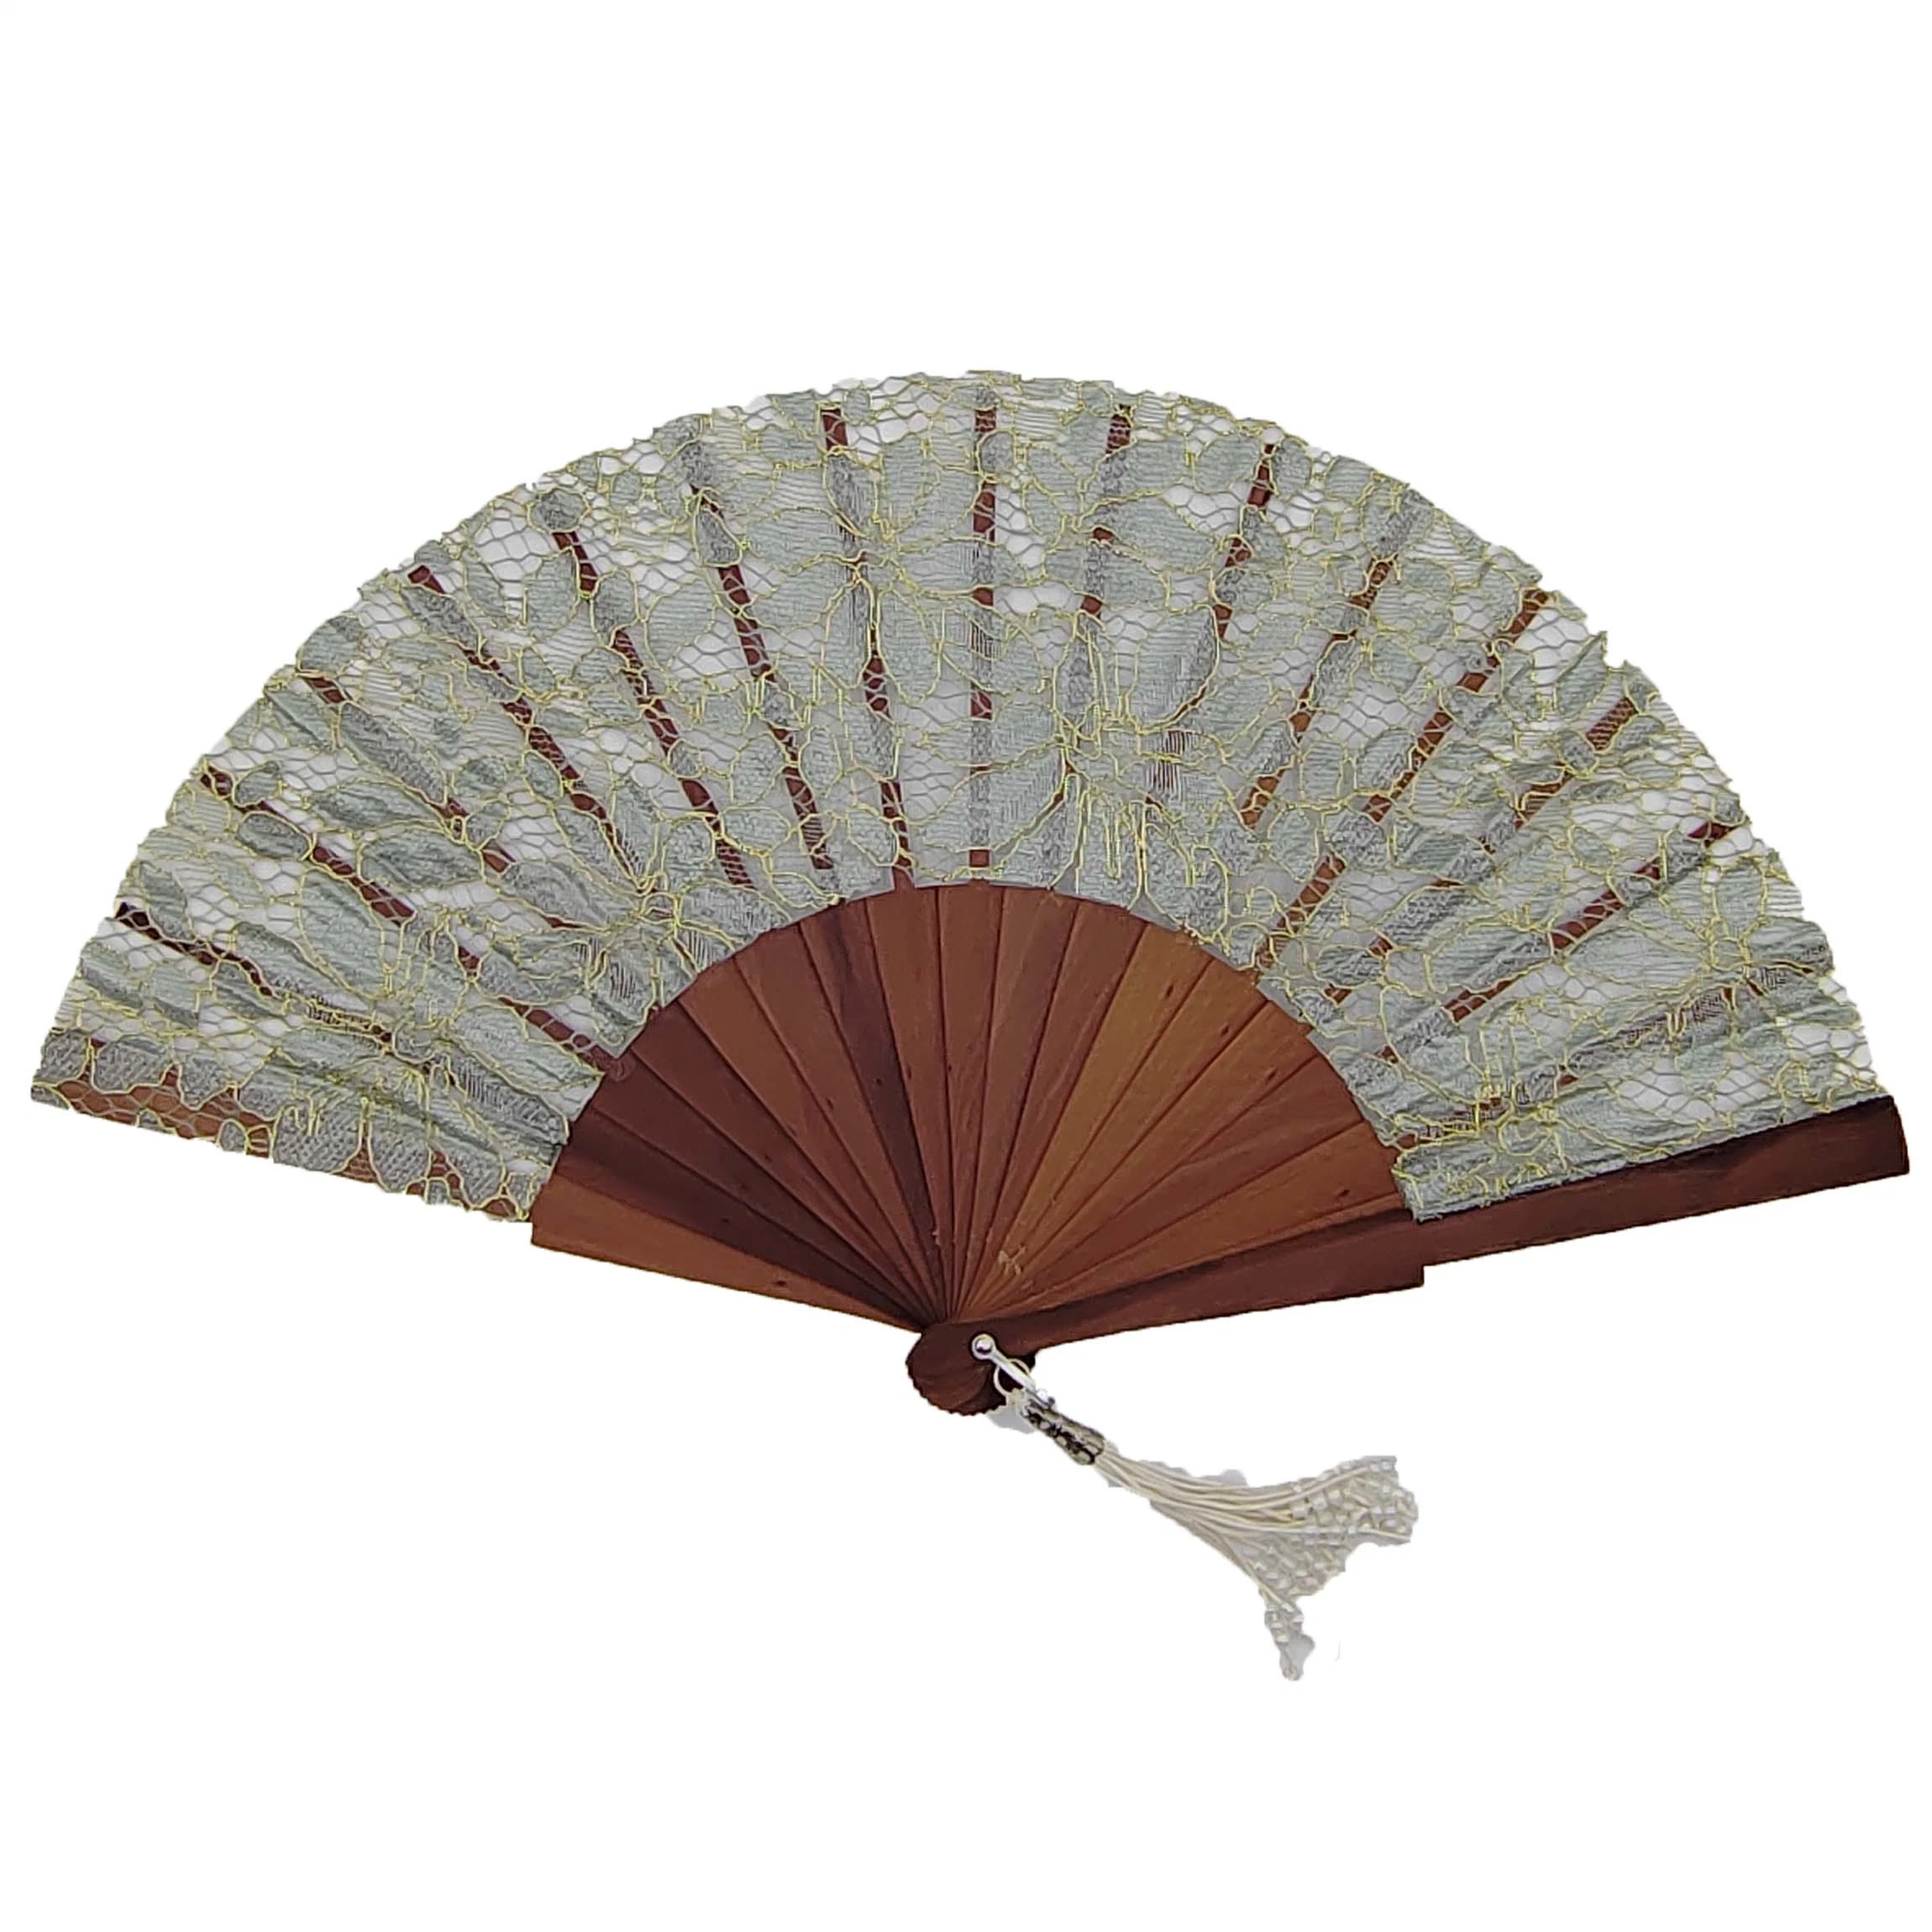 Customize Lace Hand Fans of Various Colors Wood/Plastic Ribs and Lace Fabric Hand Fan for Women